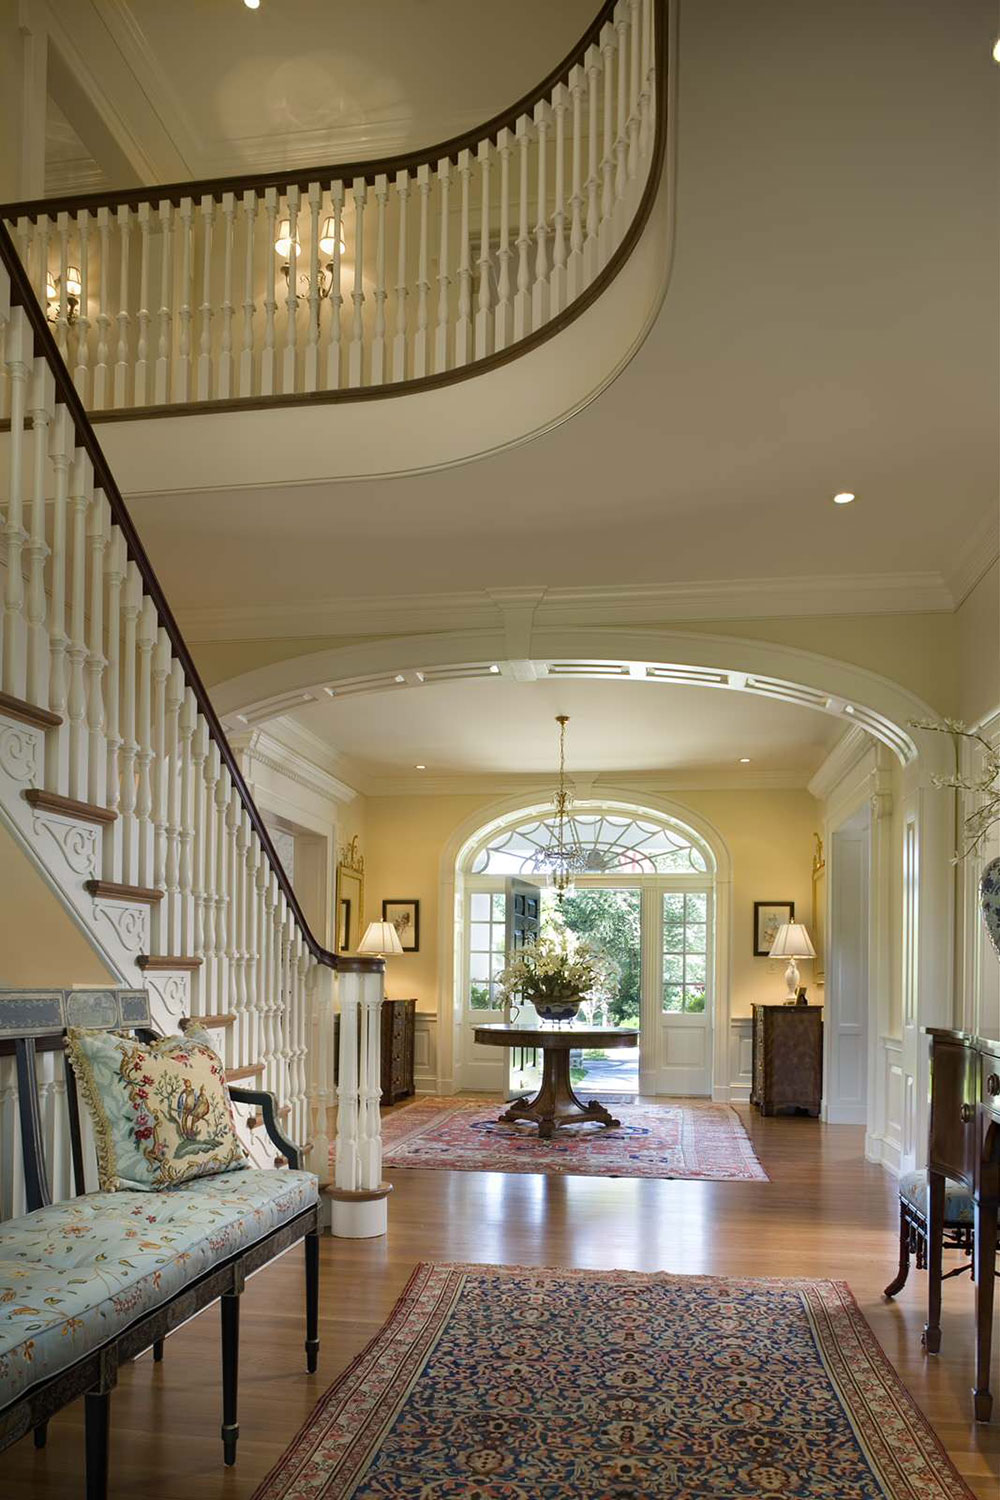 Impressive-Design-Ideas-For-Foyers3-1 Decorating A Foyer: Not A Big Deal When You Have These Ideas